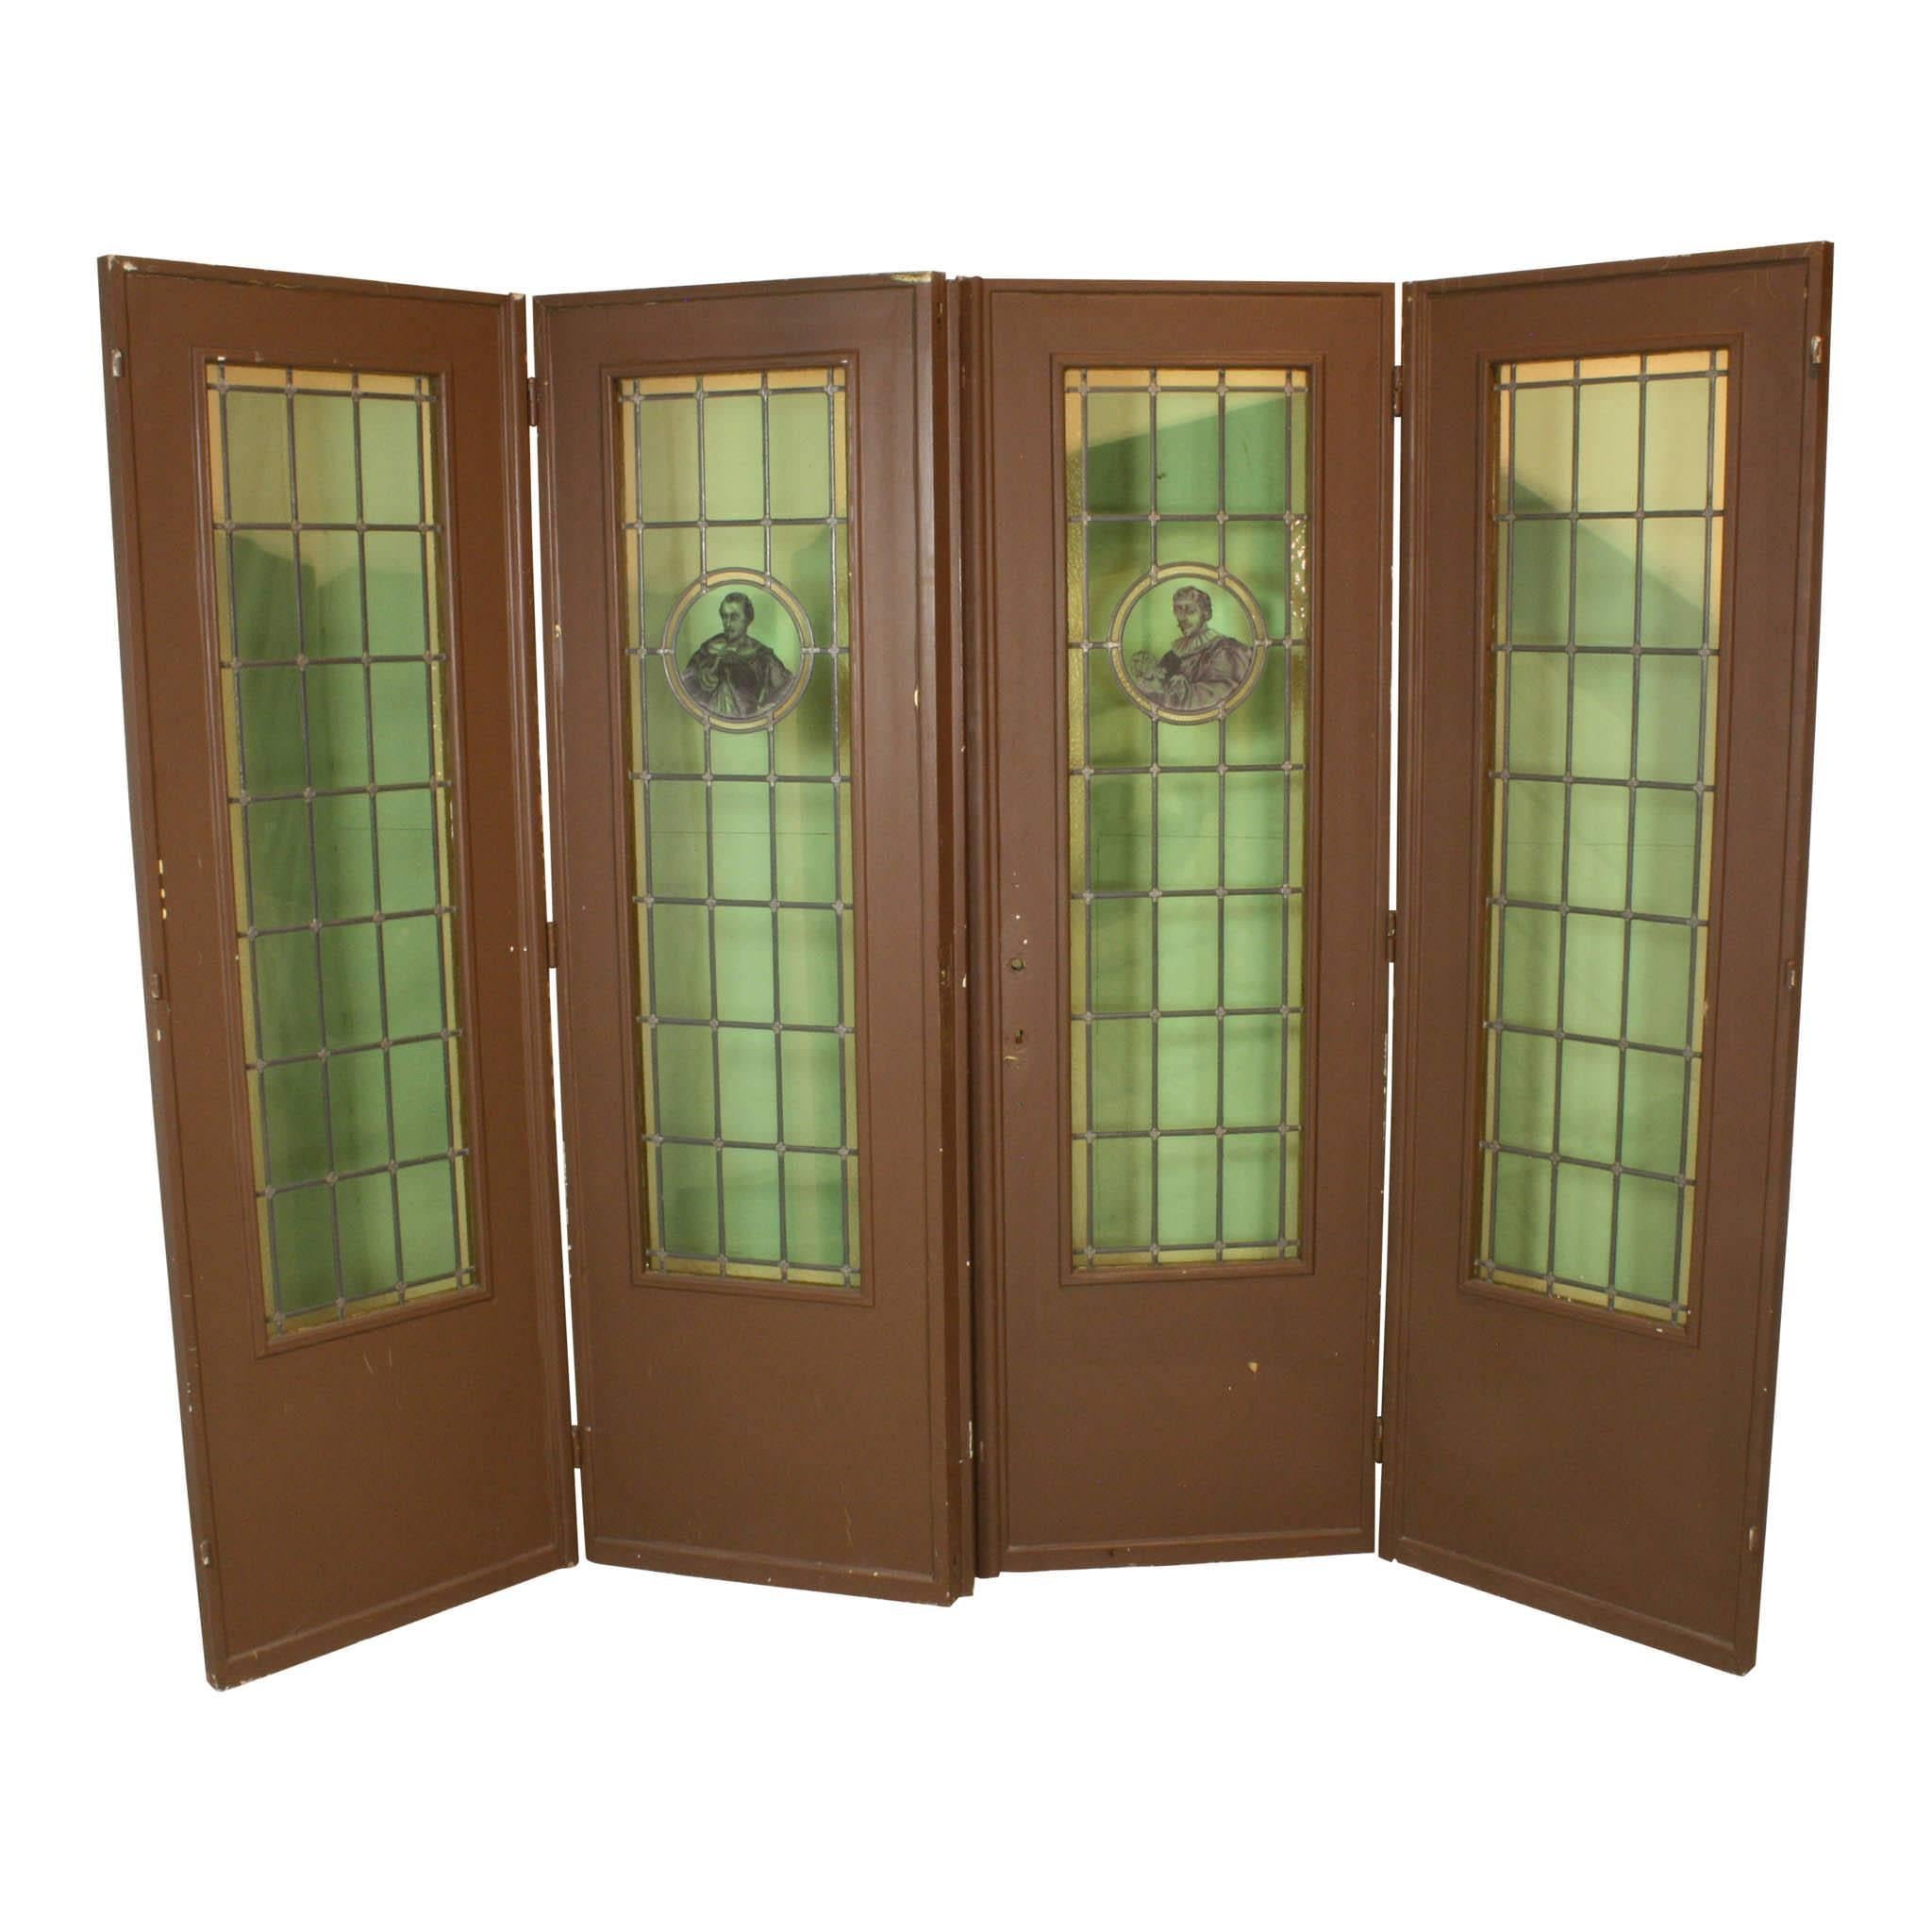 Twenty-one green, stained glass panels with a border of yellow, stained glass trim are featured on each of these folding doors. Two interesting gentlemen are painted inside the circles of the two interior doors on this set of four. One holds a